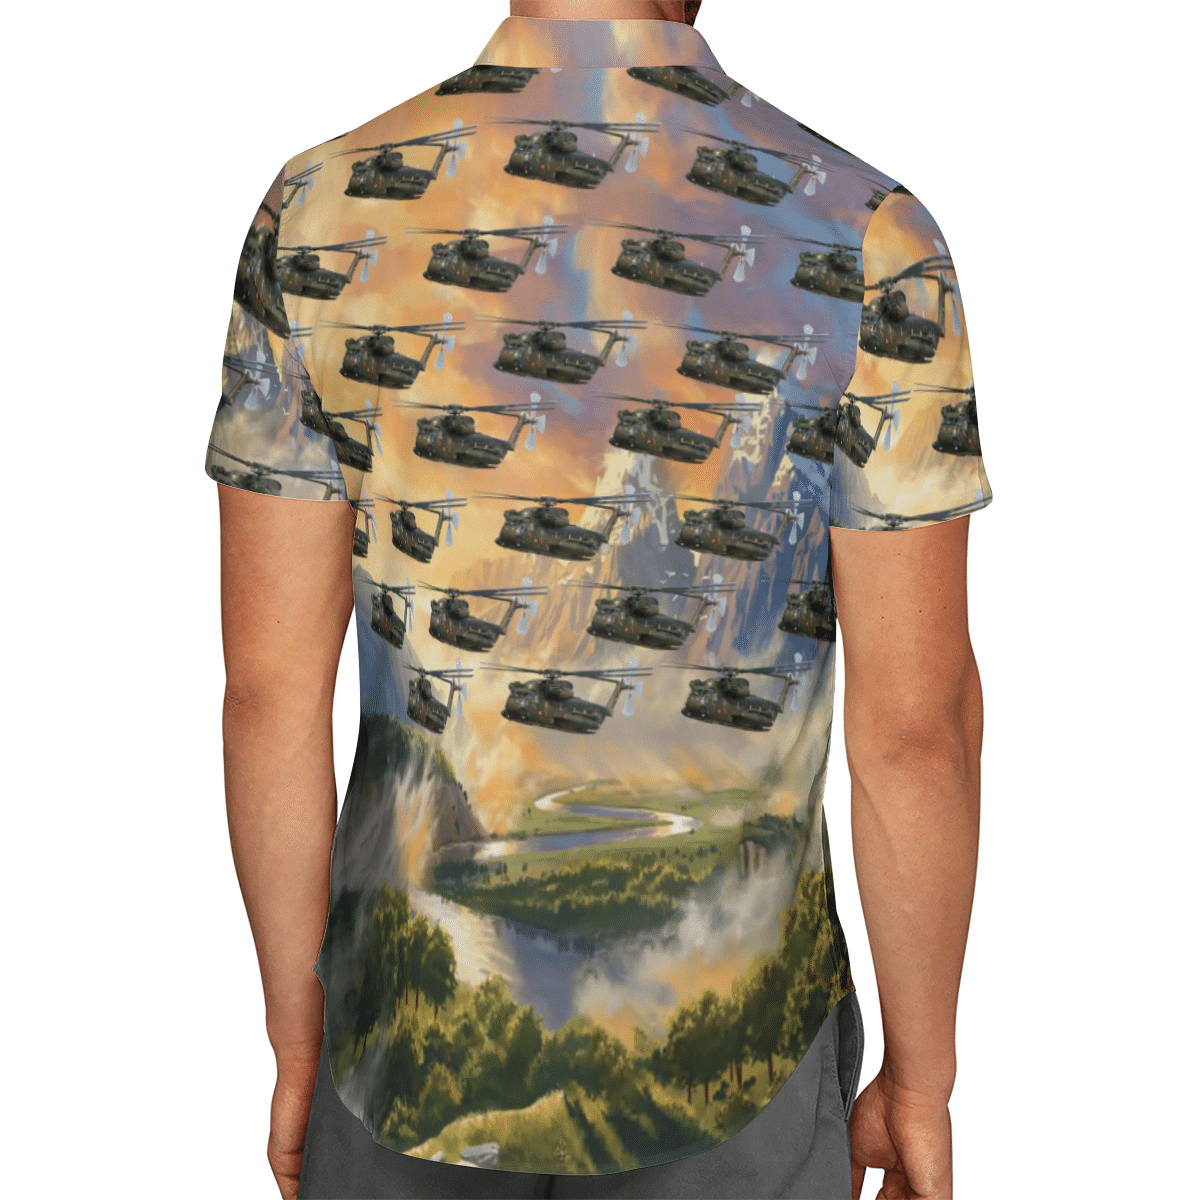 Going to the beach with a quality shirt 39